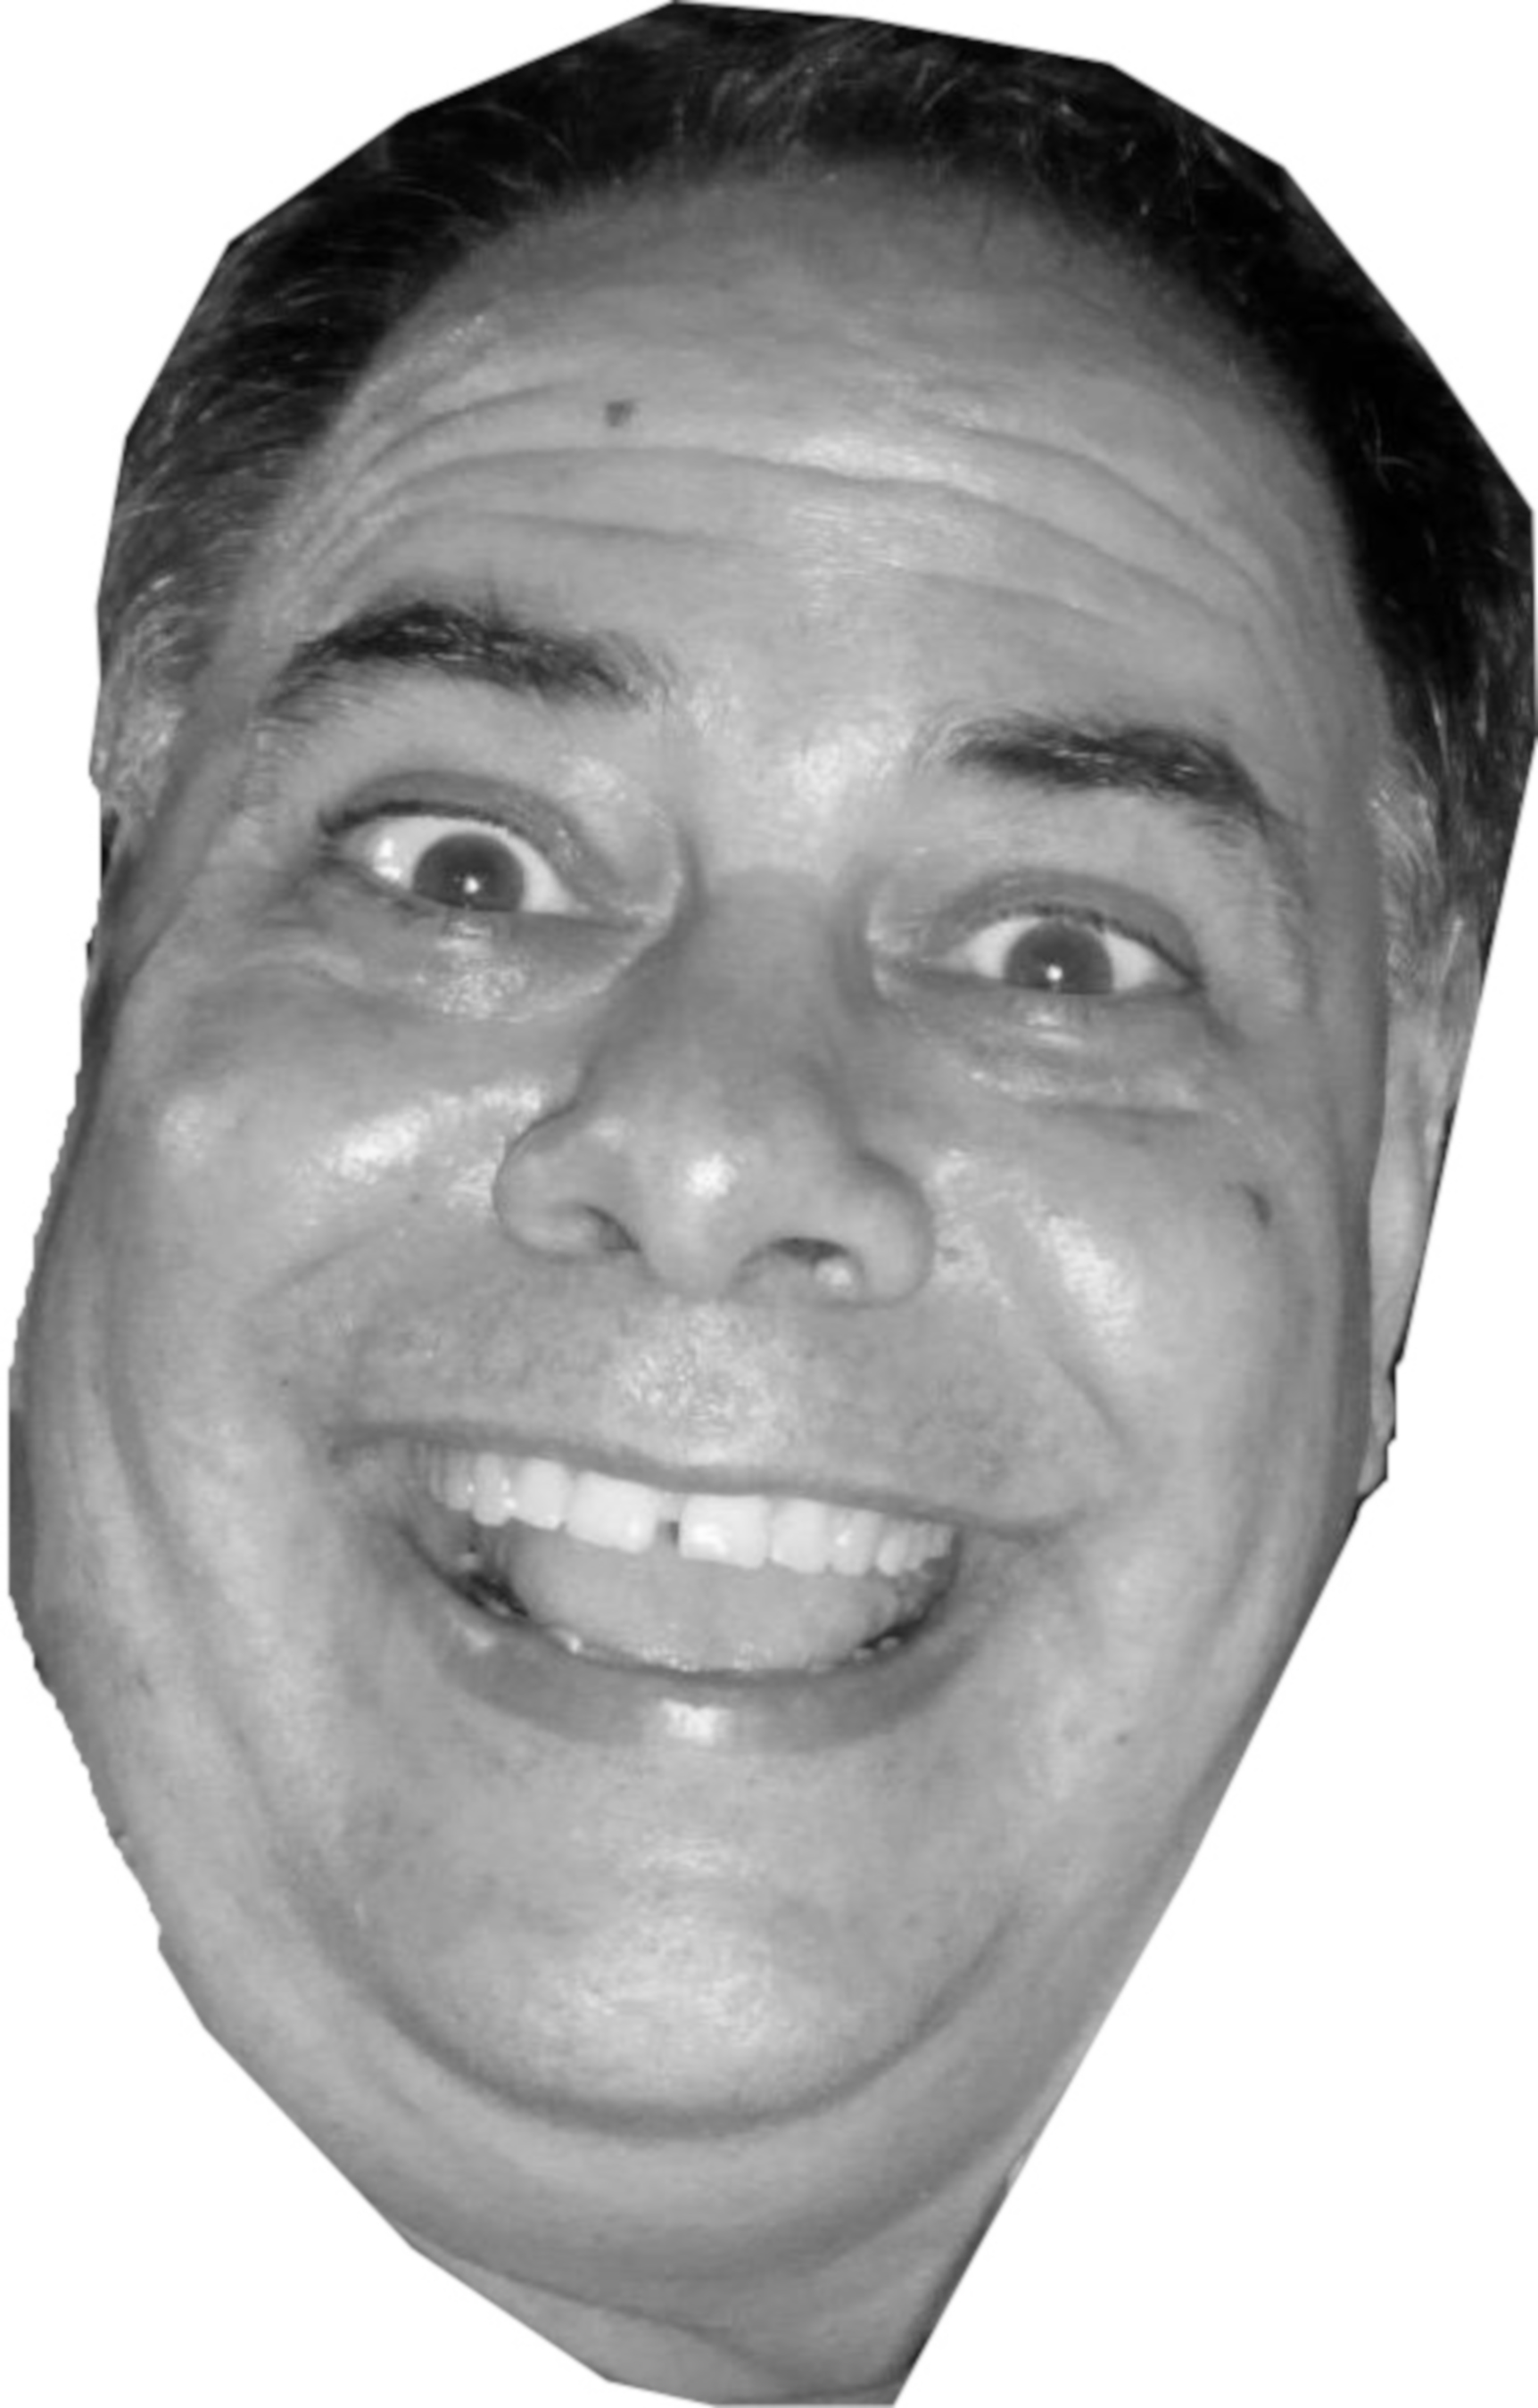 Giant, life-size B&W face of Wassa